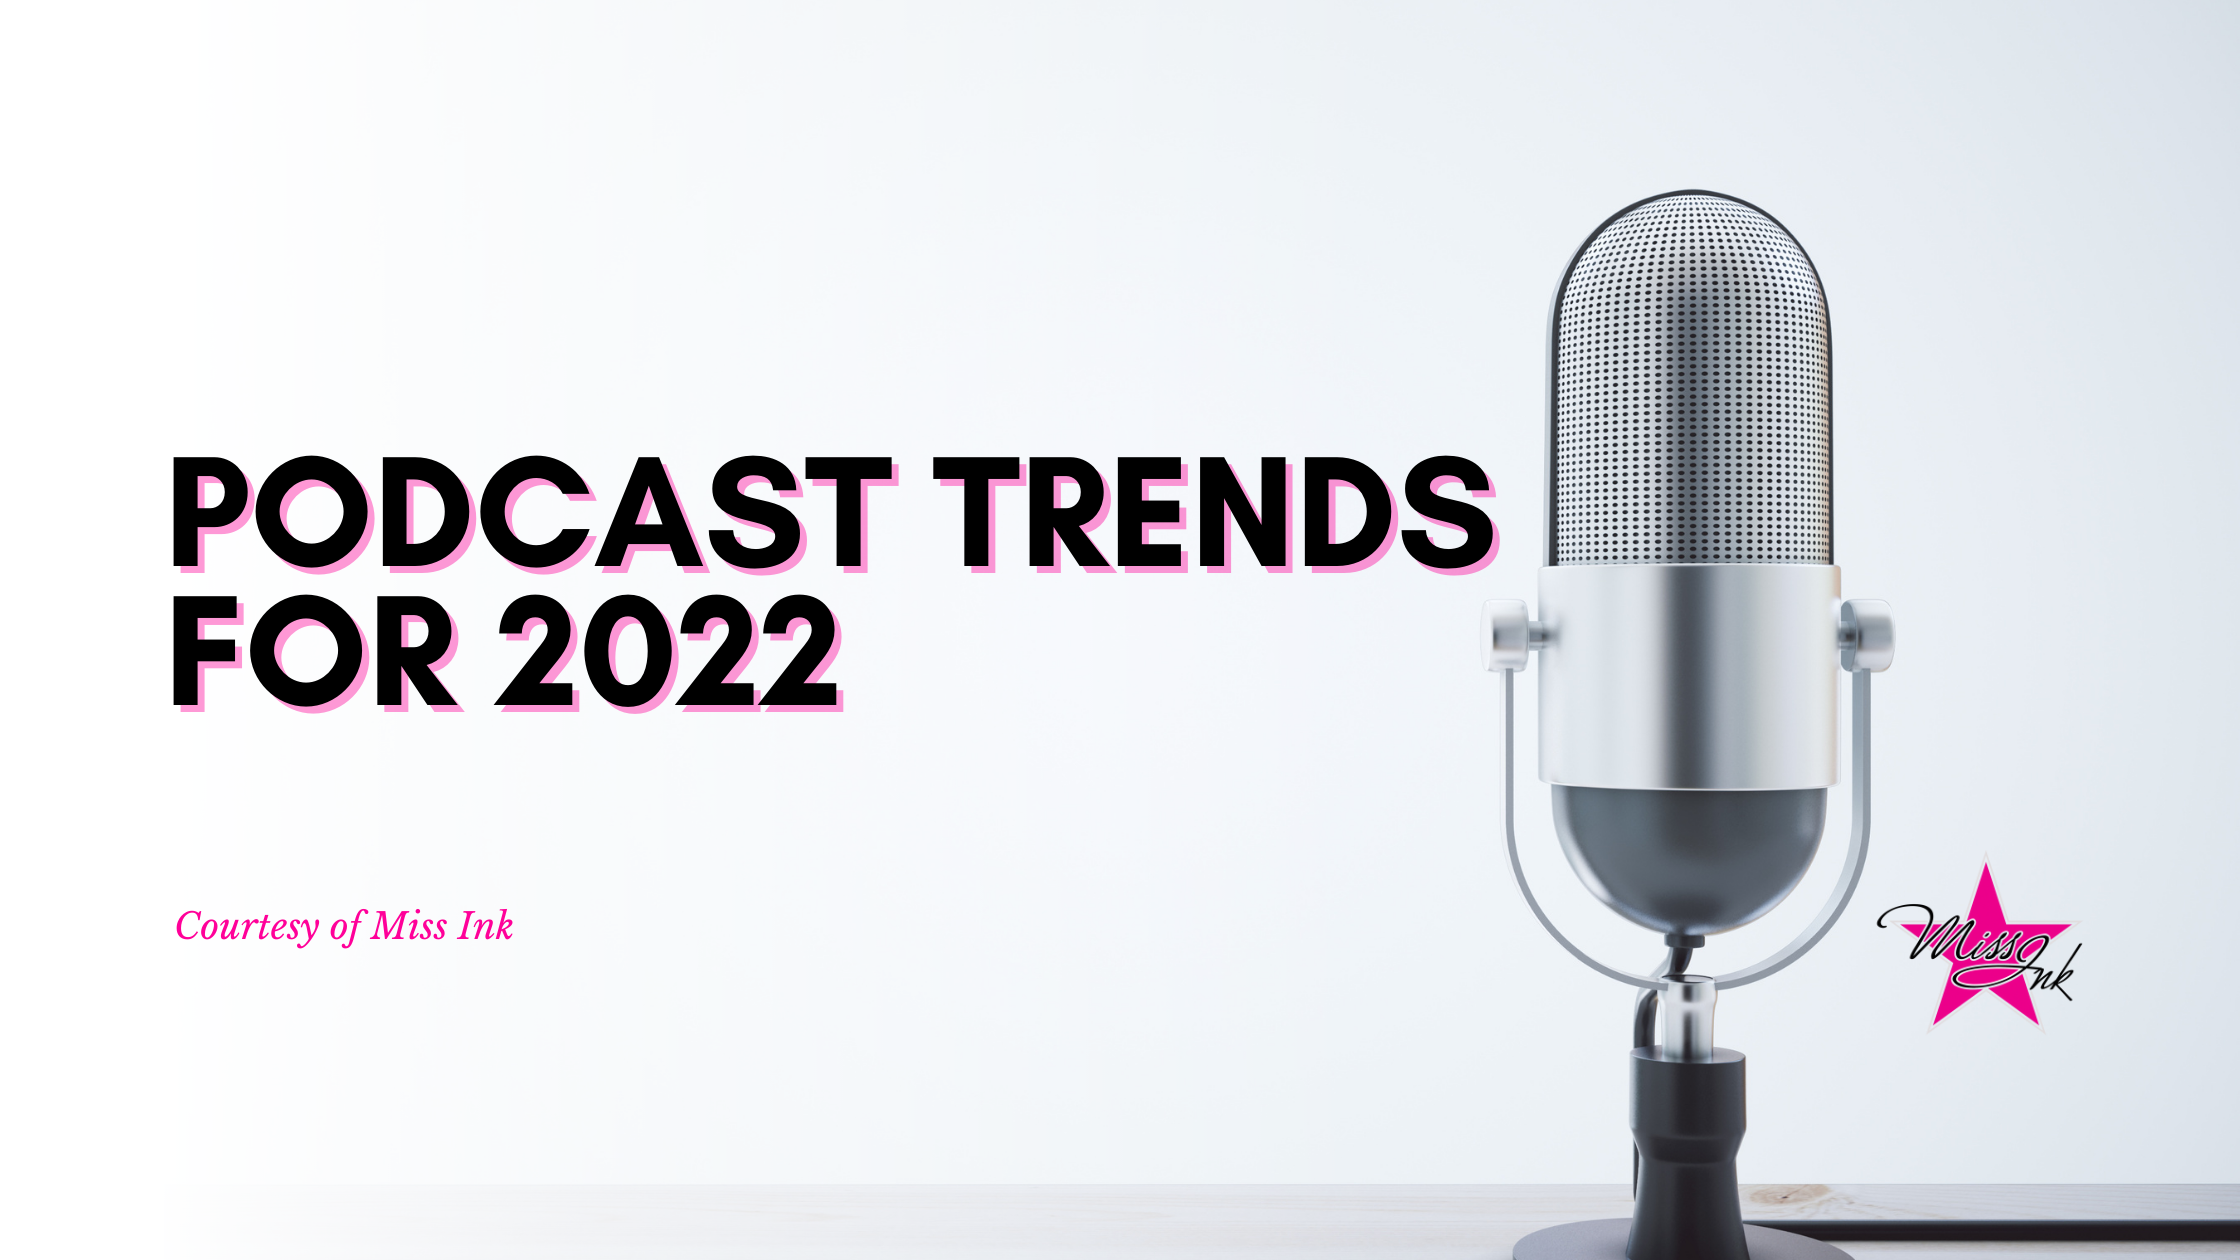 Podcast Trends for 2022